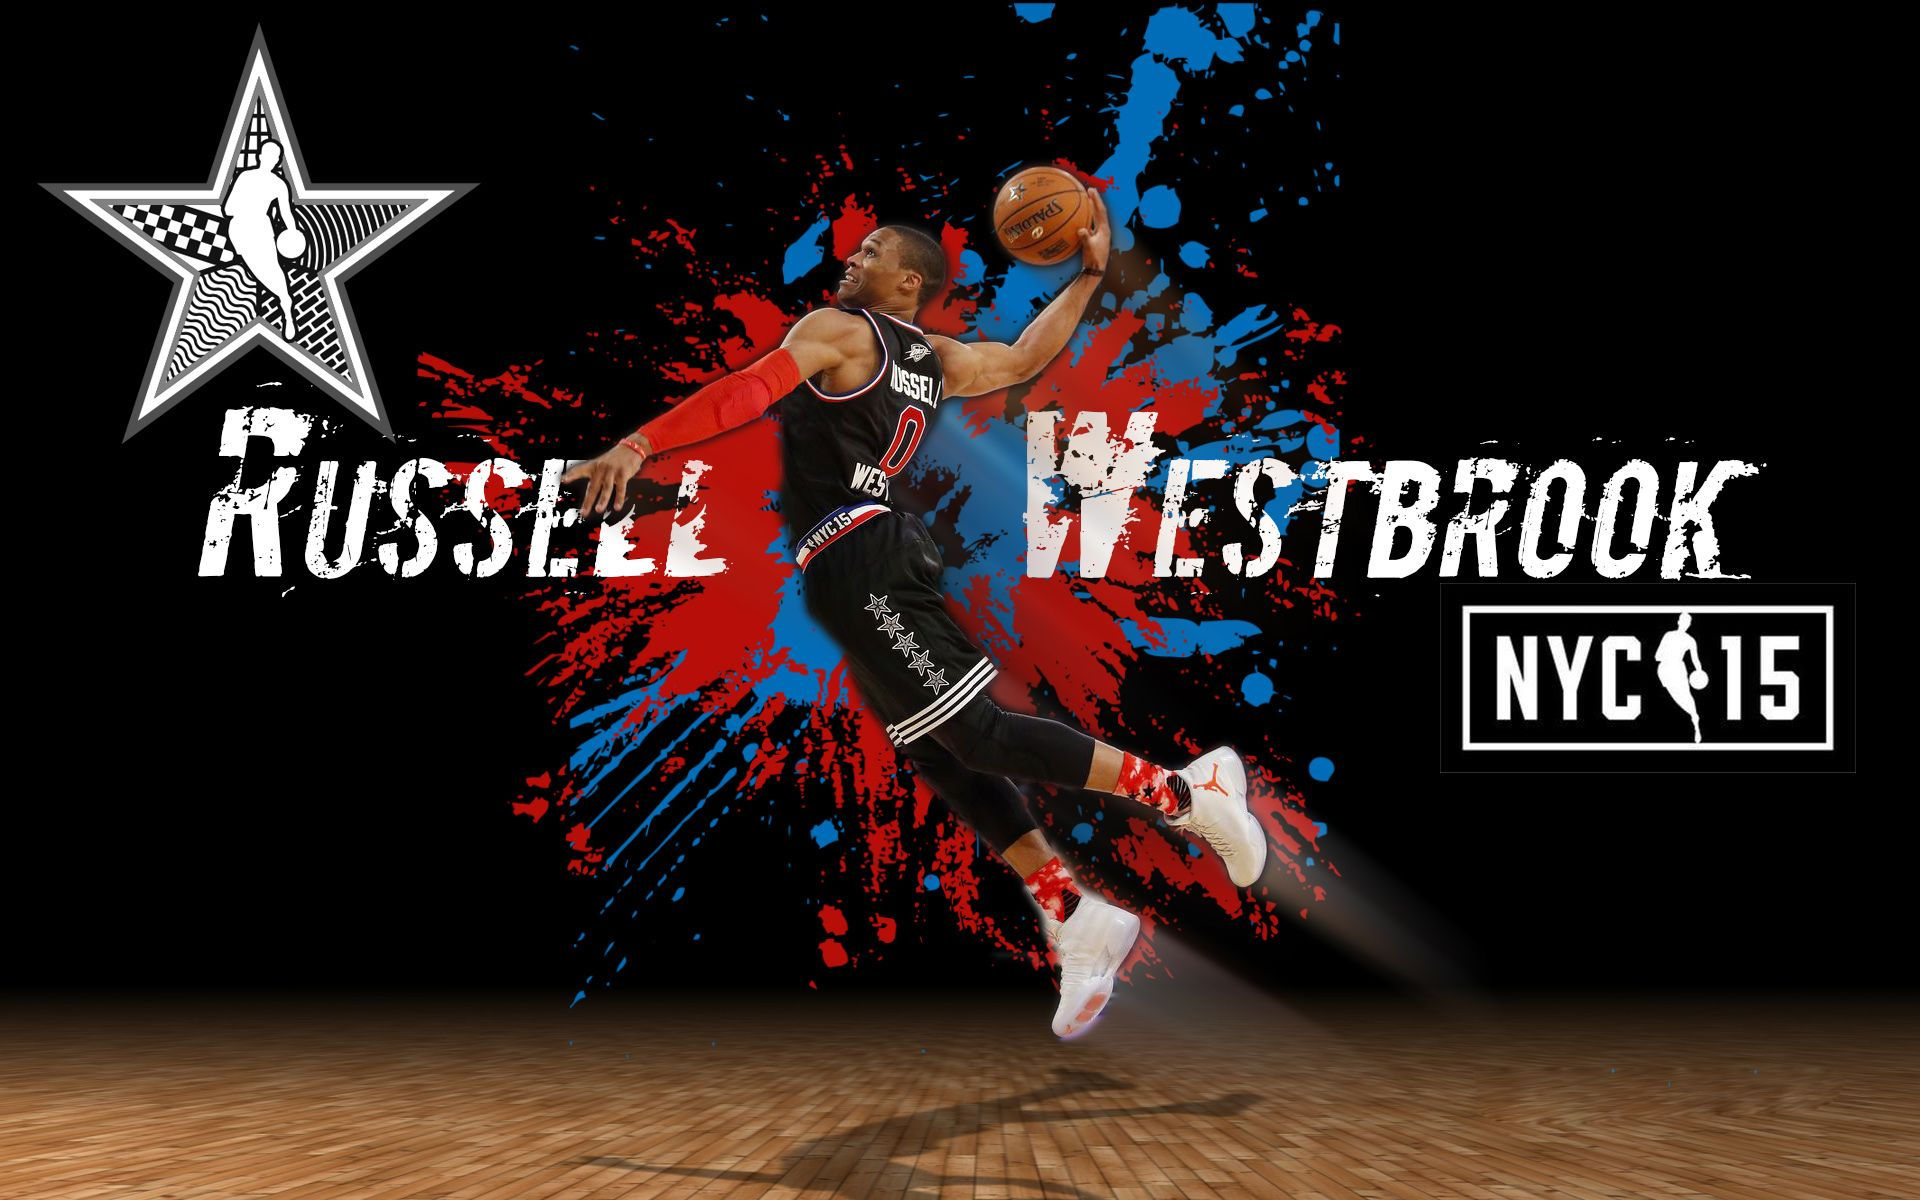 1920x1200 Russell Westbrook Wallpaper for mobile phone, tablet, desktop computer and other devices HD &acirc;&#128;&brvbar; | Westbrook wallpapers, Russell westbrook wallpaper, Russell westbrook